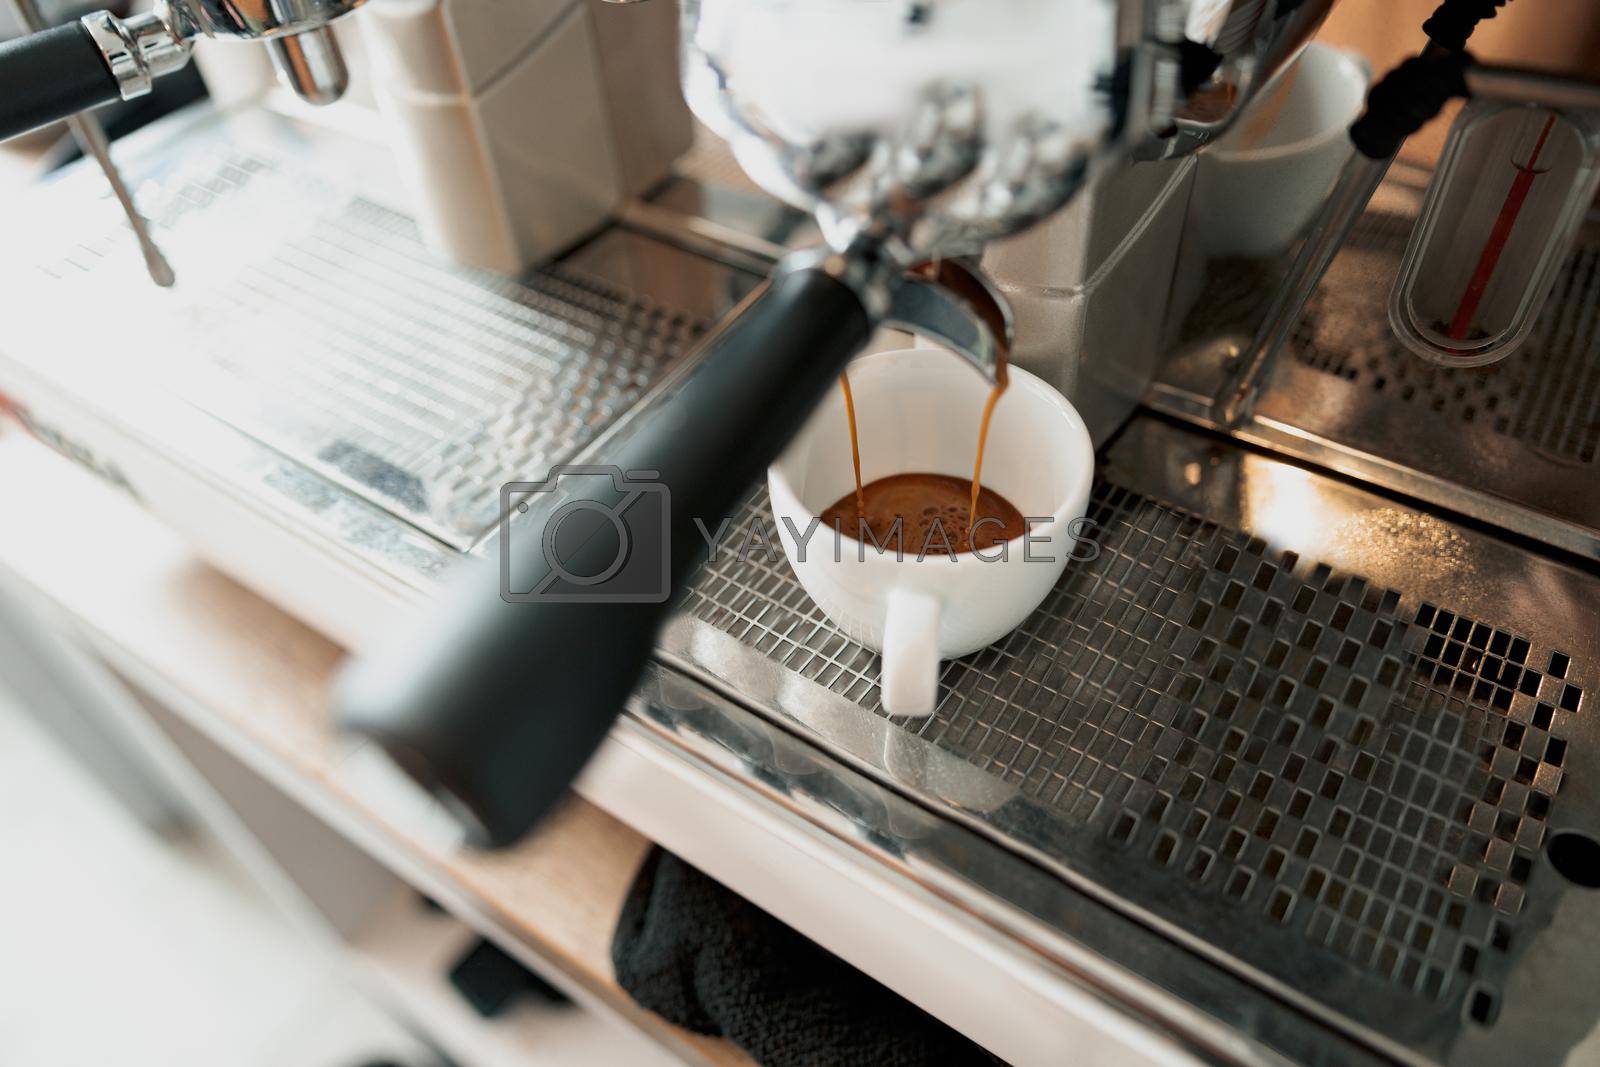 Royalty free image of Professional coffee machine brewing coffee in cafeteria by Yaroslav_astakhov